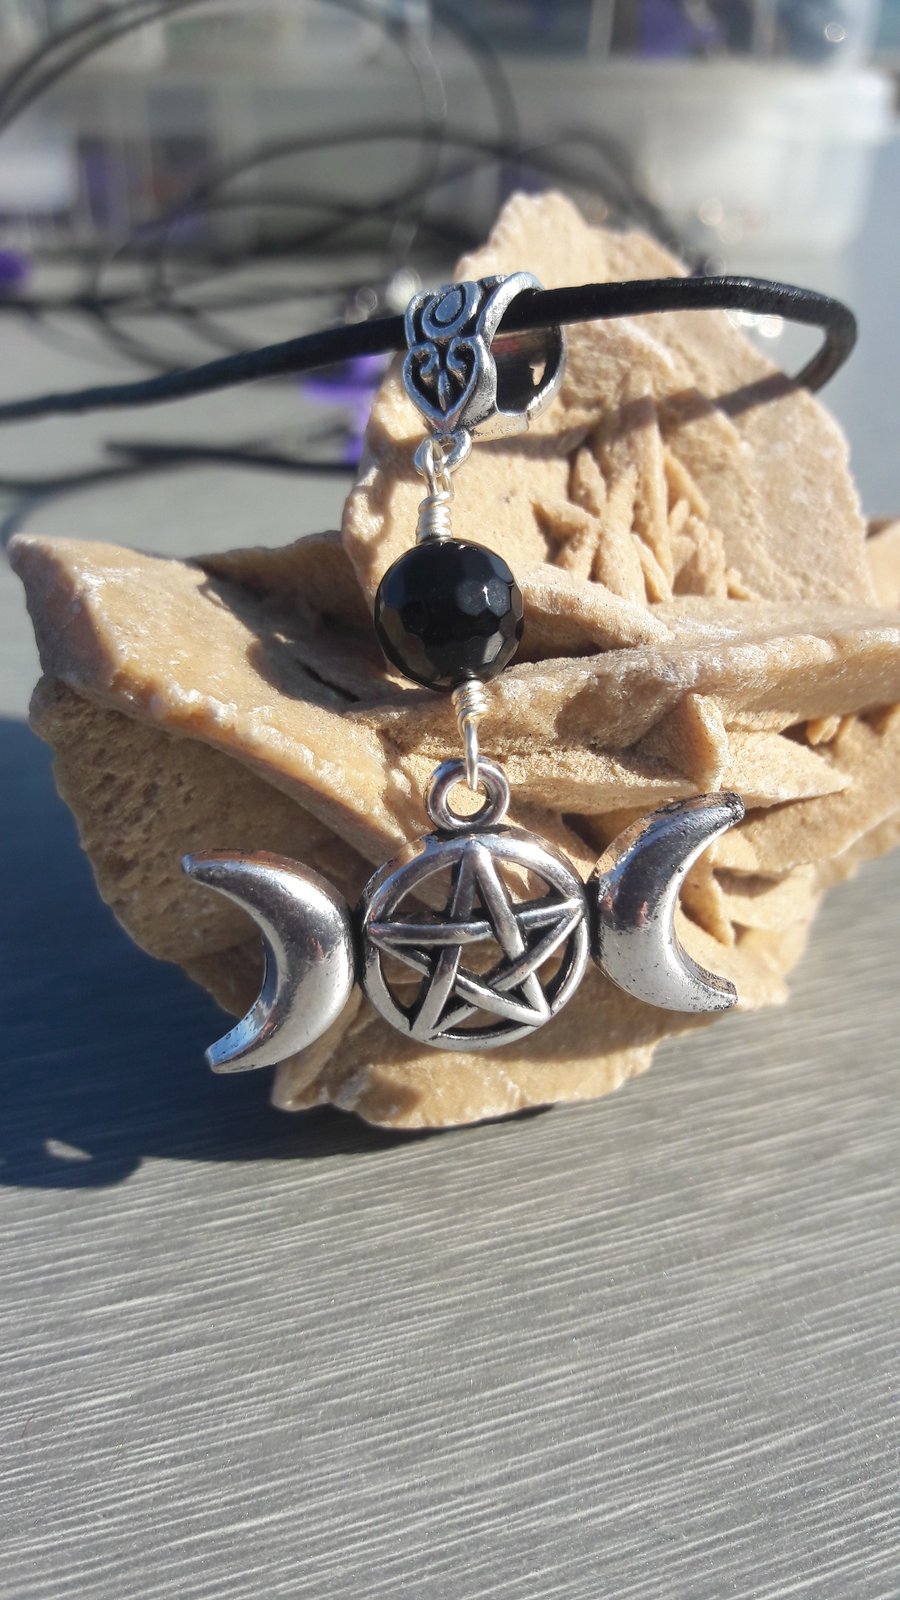 Black Agate, Triple Moon and Pentacle Pendant on Leather Cord Necklace